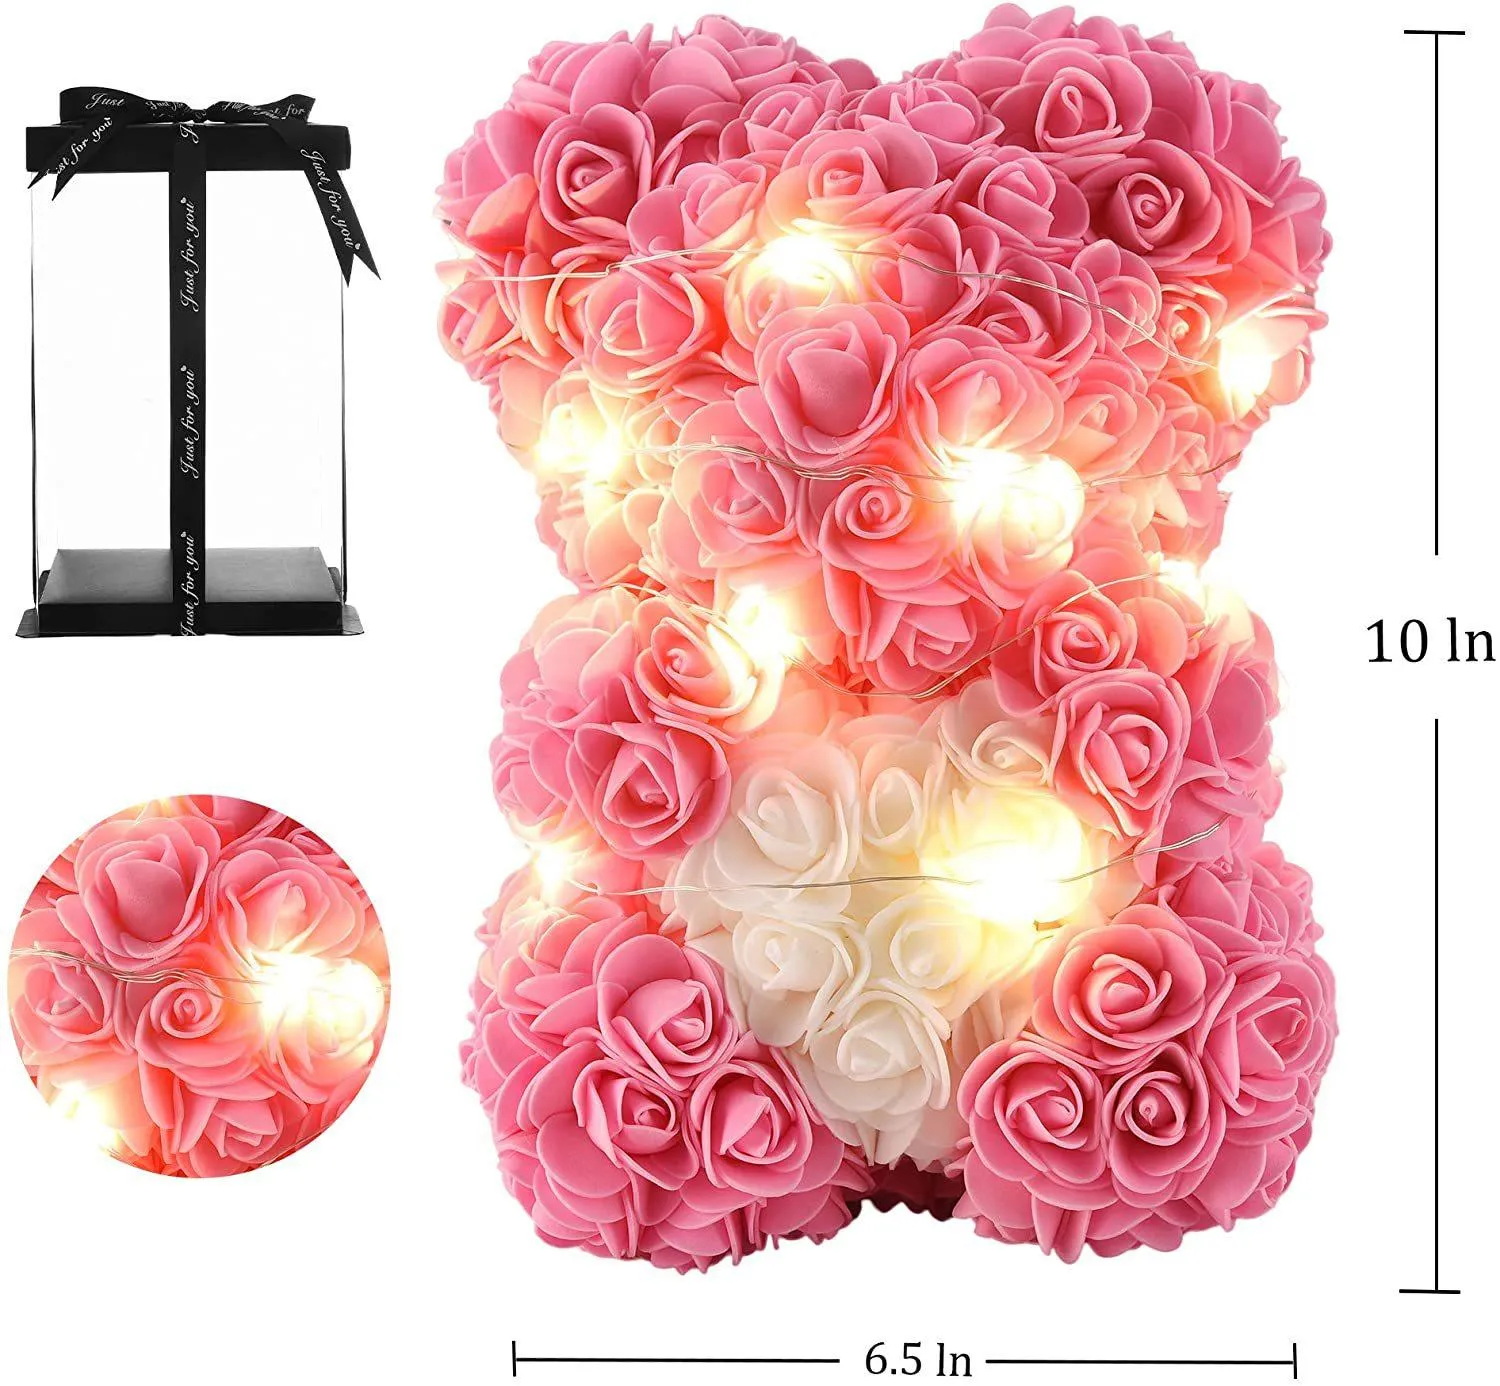 25cm Led Lighted Bear Rose Flower Valentine Day Gifts Party Decoration Love Children`s days Teacher`s day New year Gift Free DHL HH21-873